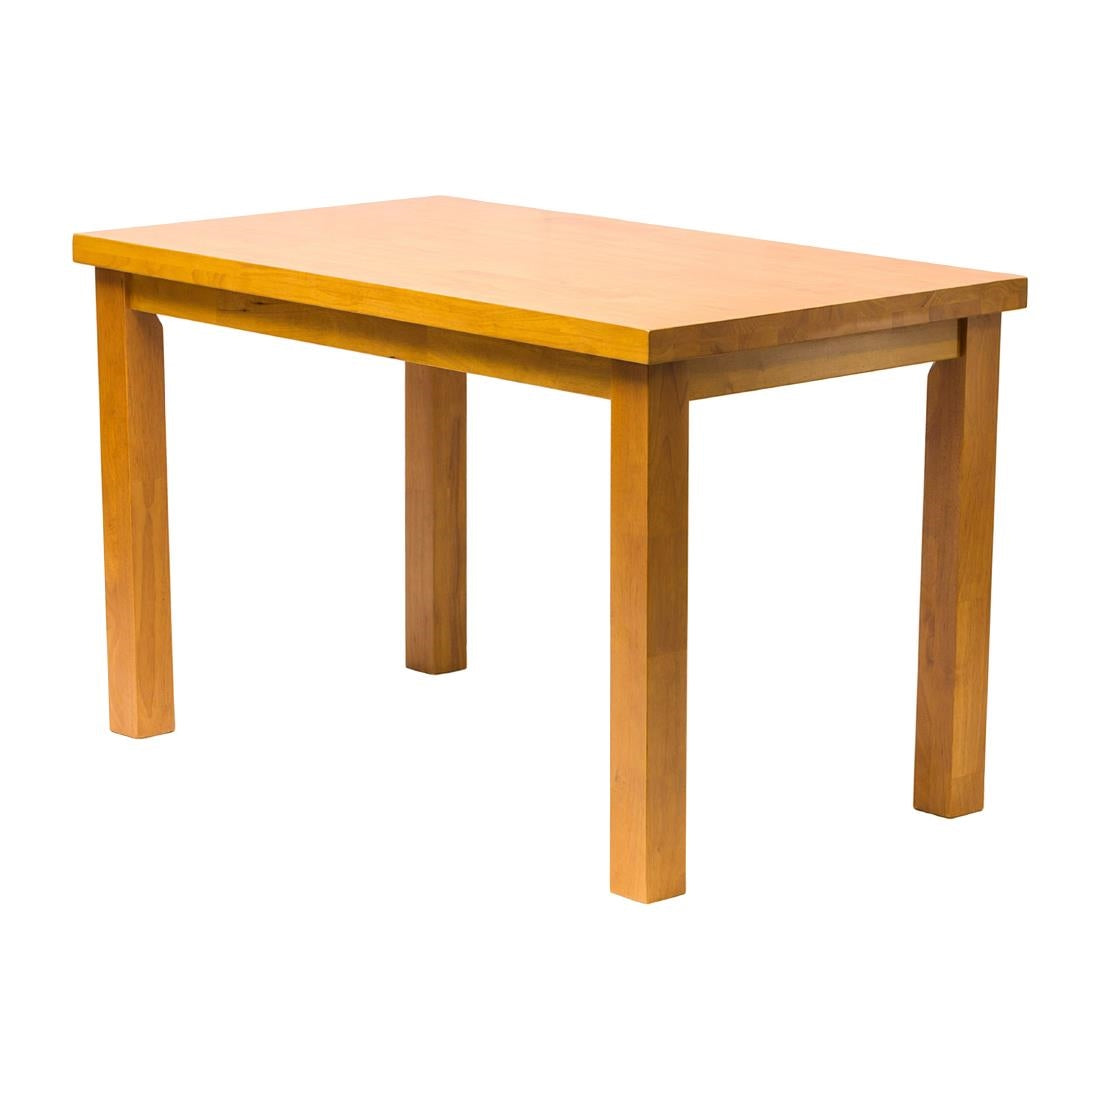 FT490 Kendal Rectangle Dining Table Soft Oak 1200x700mm JD Catering Equipment Solutions Ltd